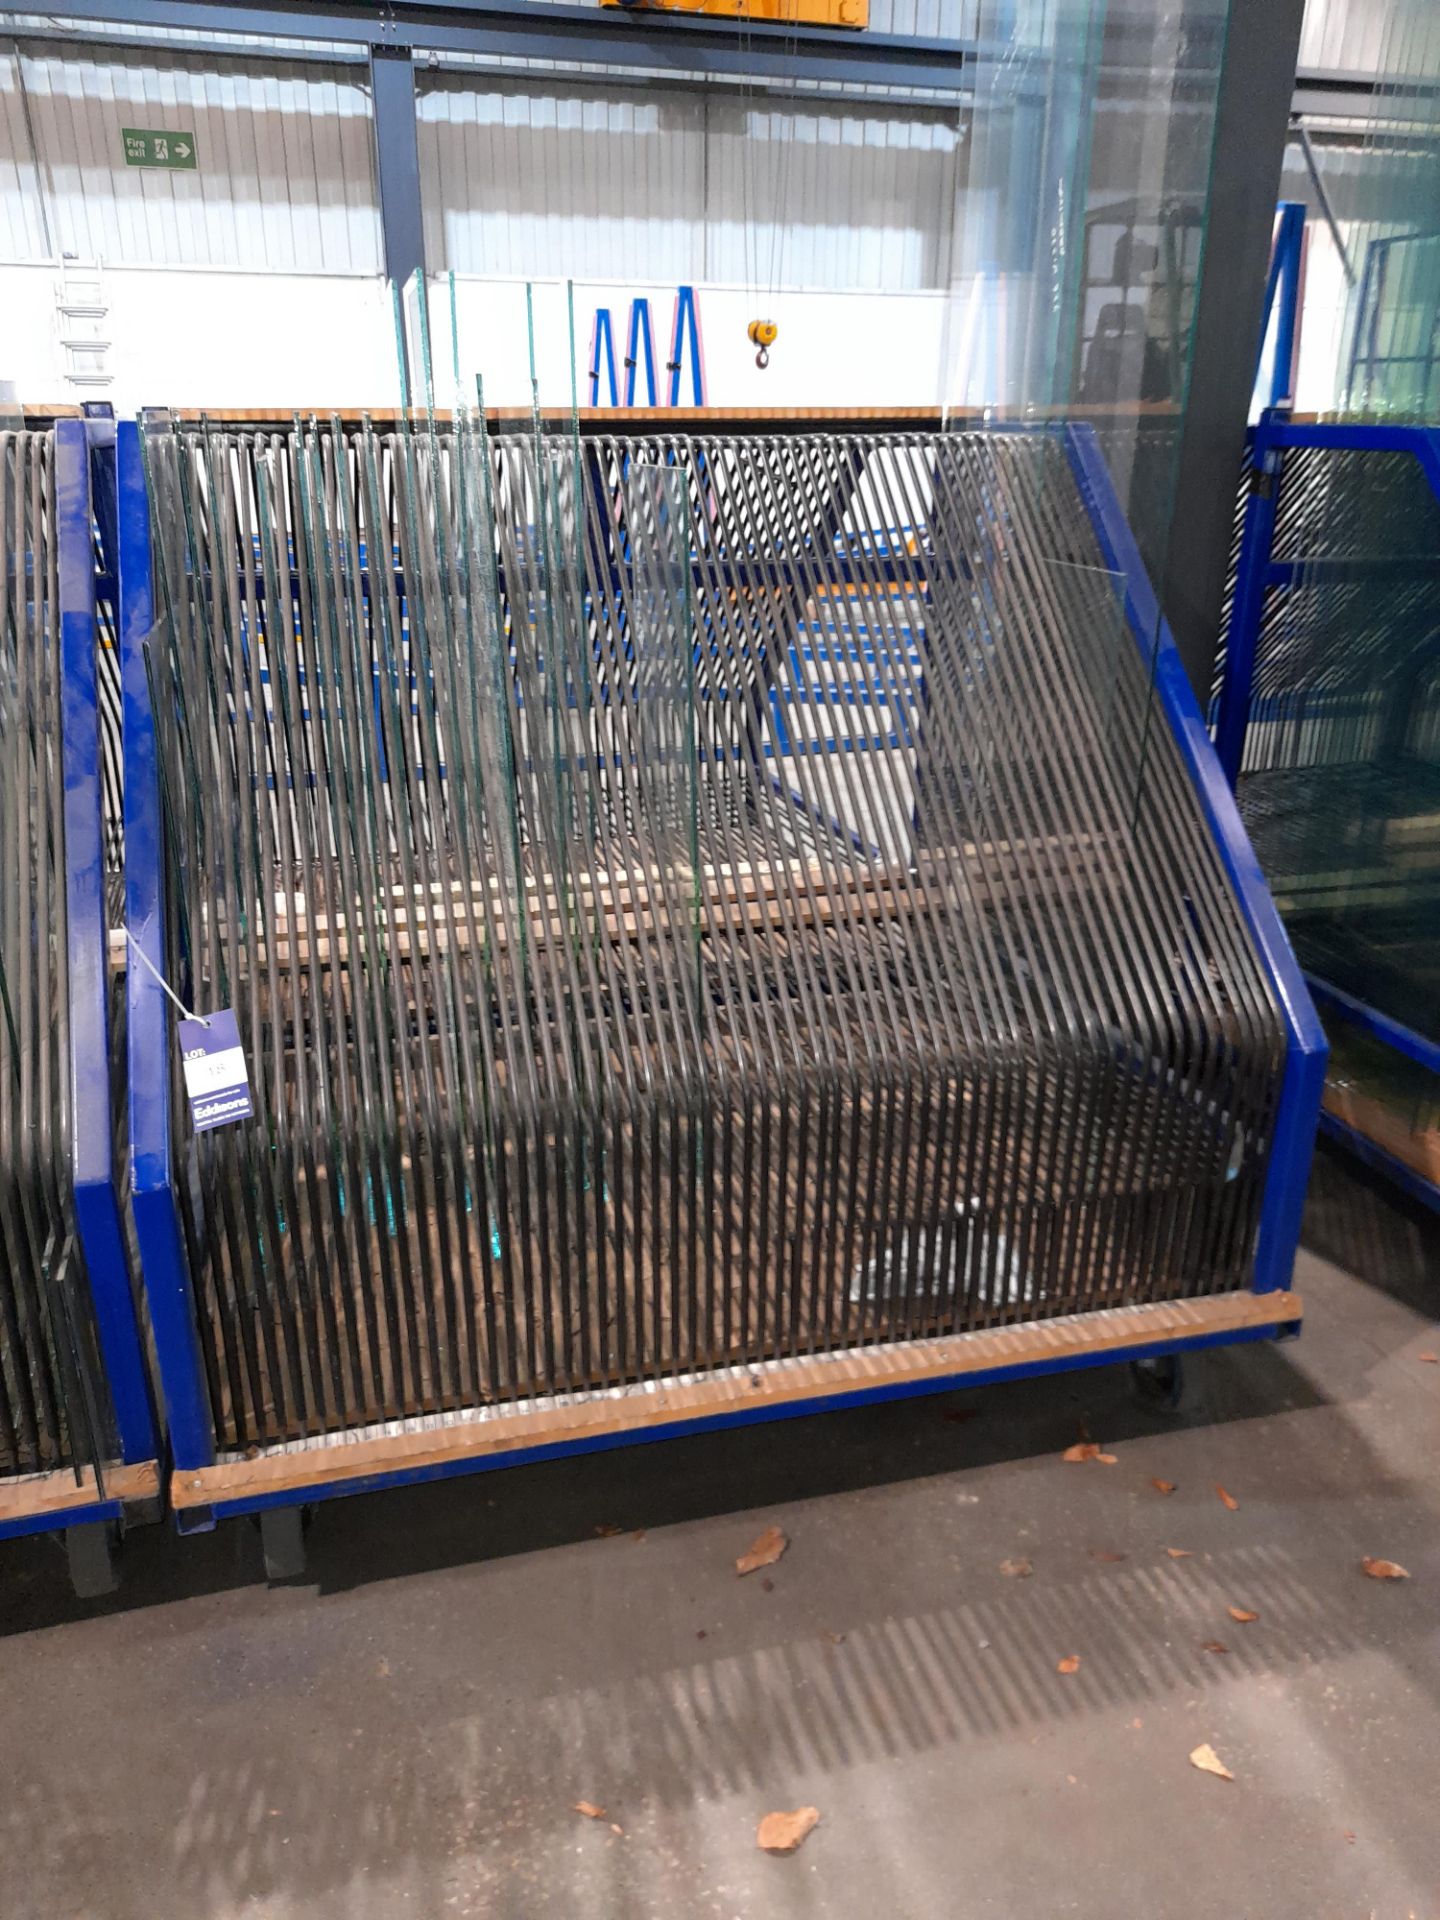 2 x Mobile glass sheet stock trolleys, with contents (Buyer must removal all)